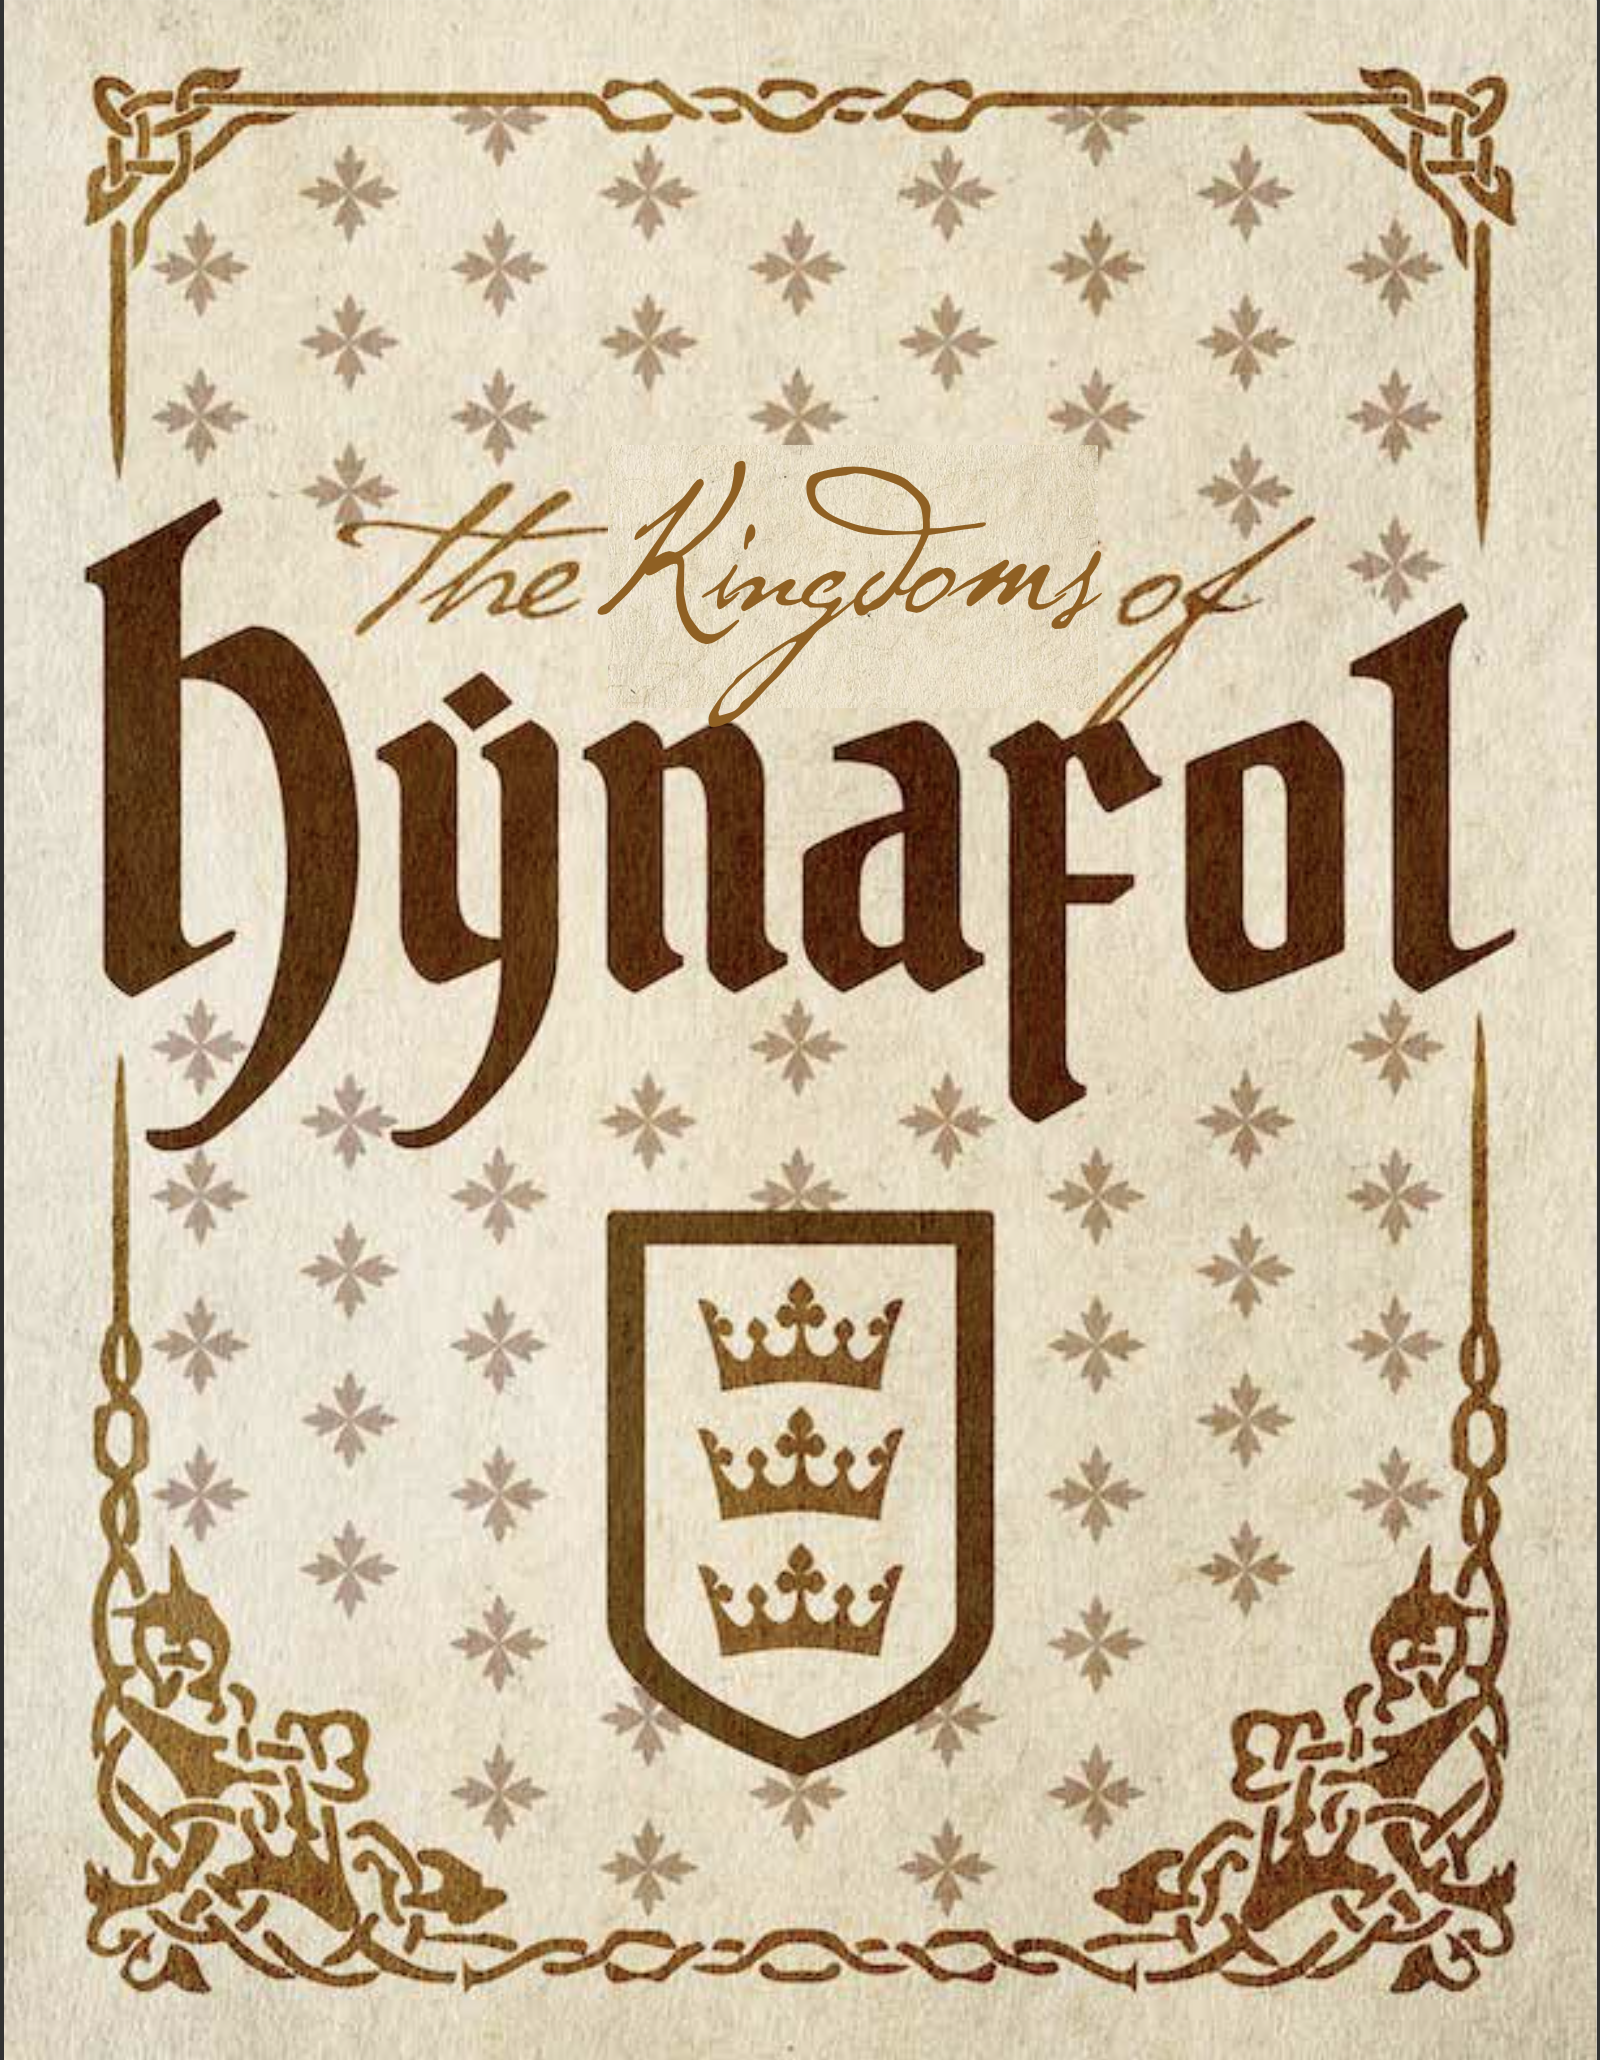 The Guilds of Hynafol